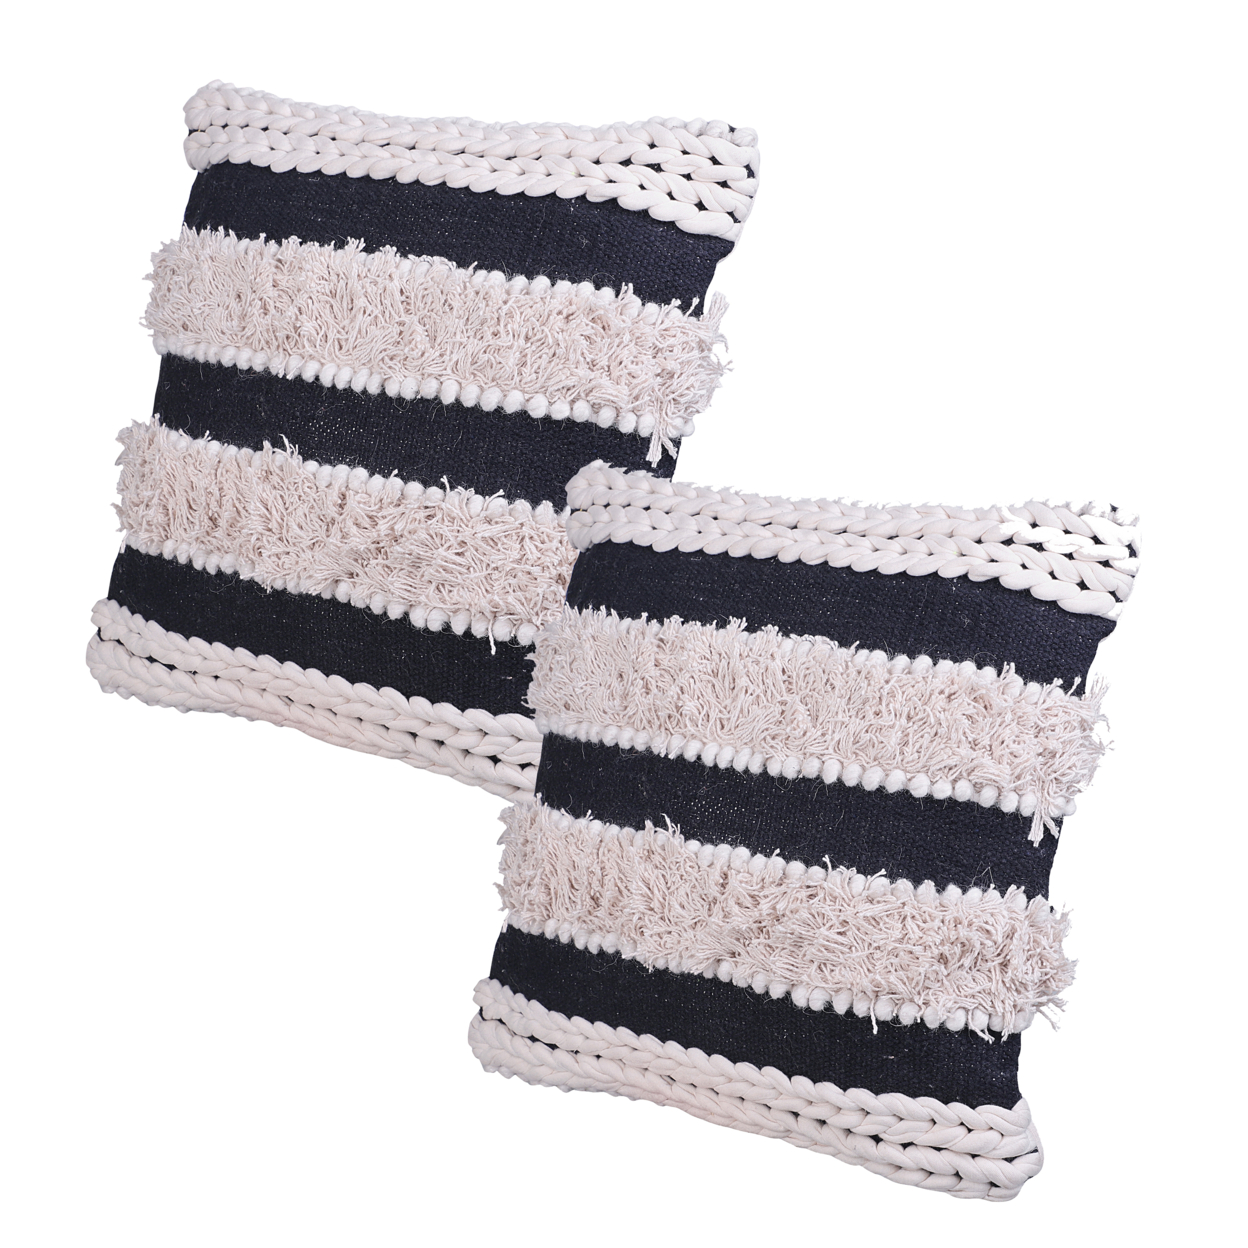 Adiv 18 X 18 Handcrafted Shaggy Cotton Accent Throw Pillows, Handknit Yarn, Set Of 2, White, Black